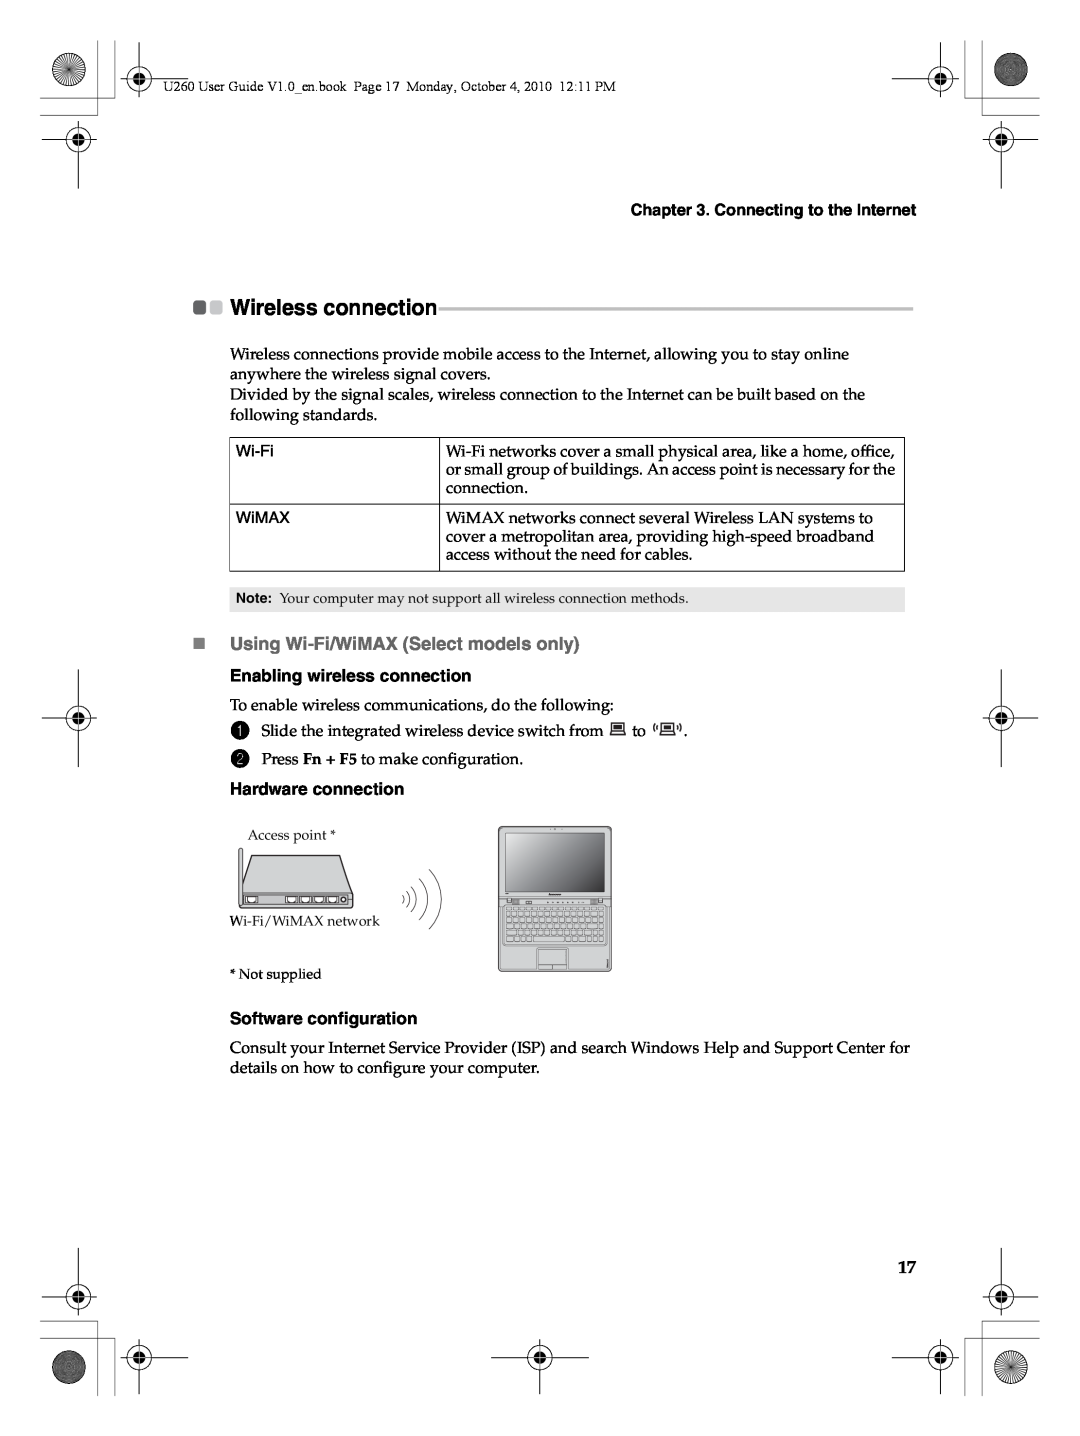 Lenovo U260 manual Wireless connection, Connecting to the Internet, Enabling wireless connection, Hardware connection 